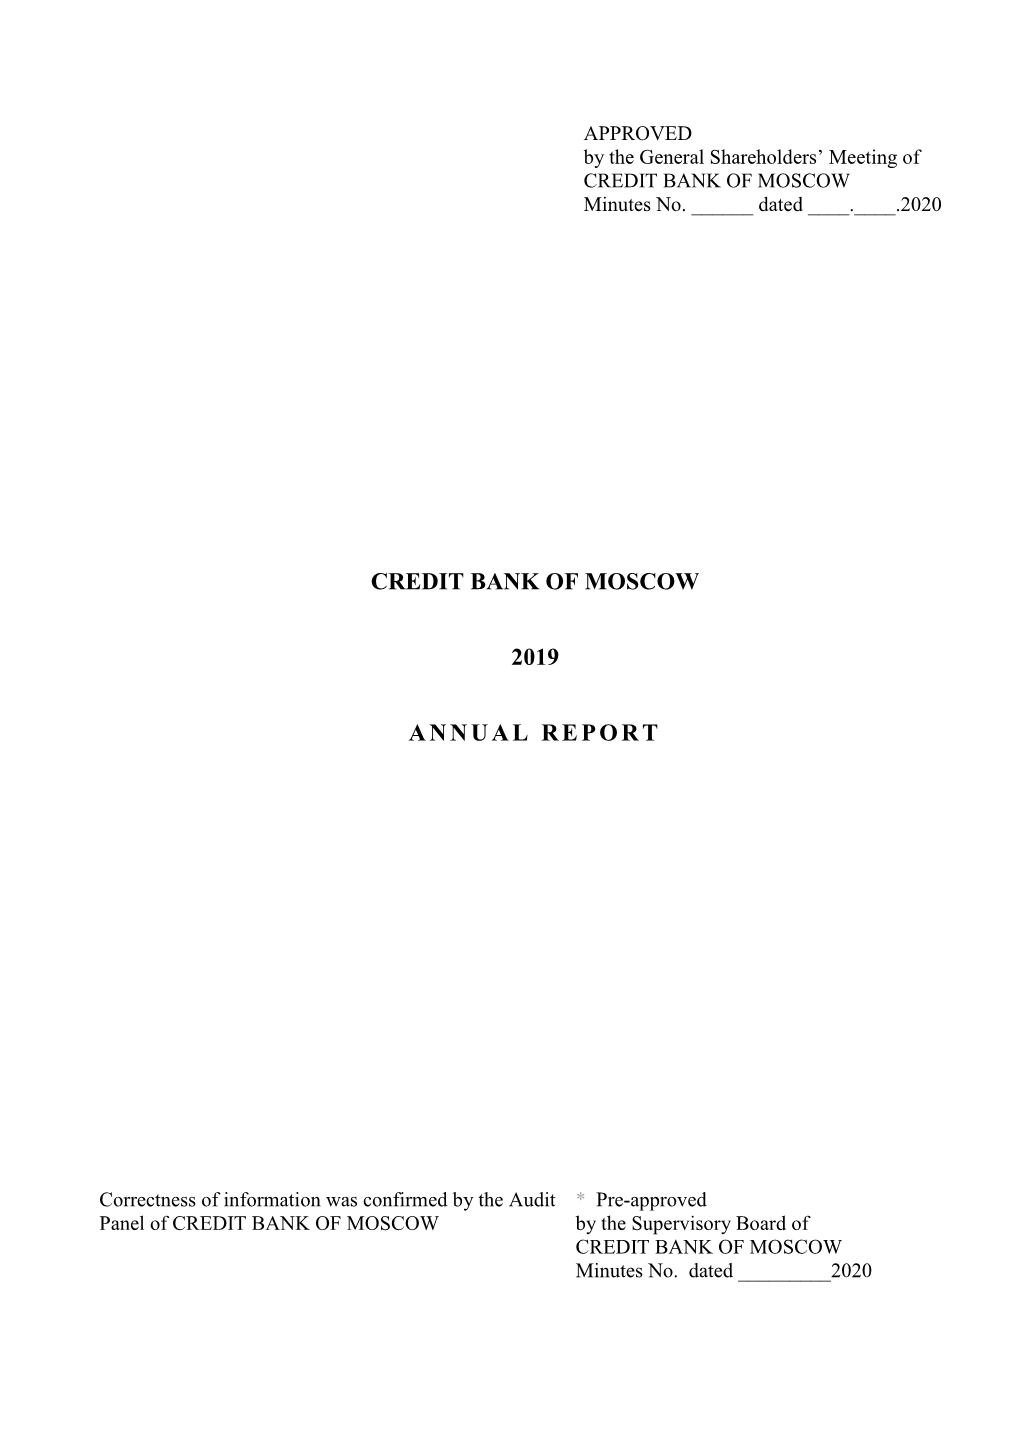 Credit Bank of Moscow 2019 Annual Report